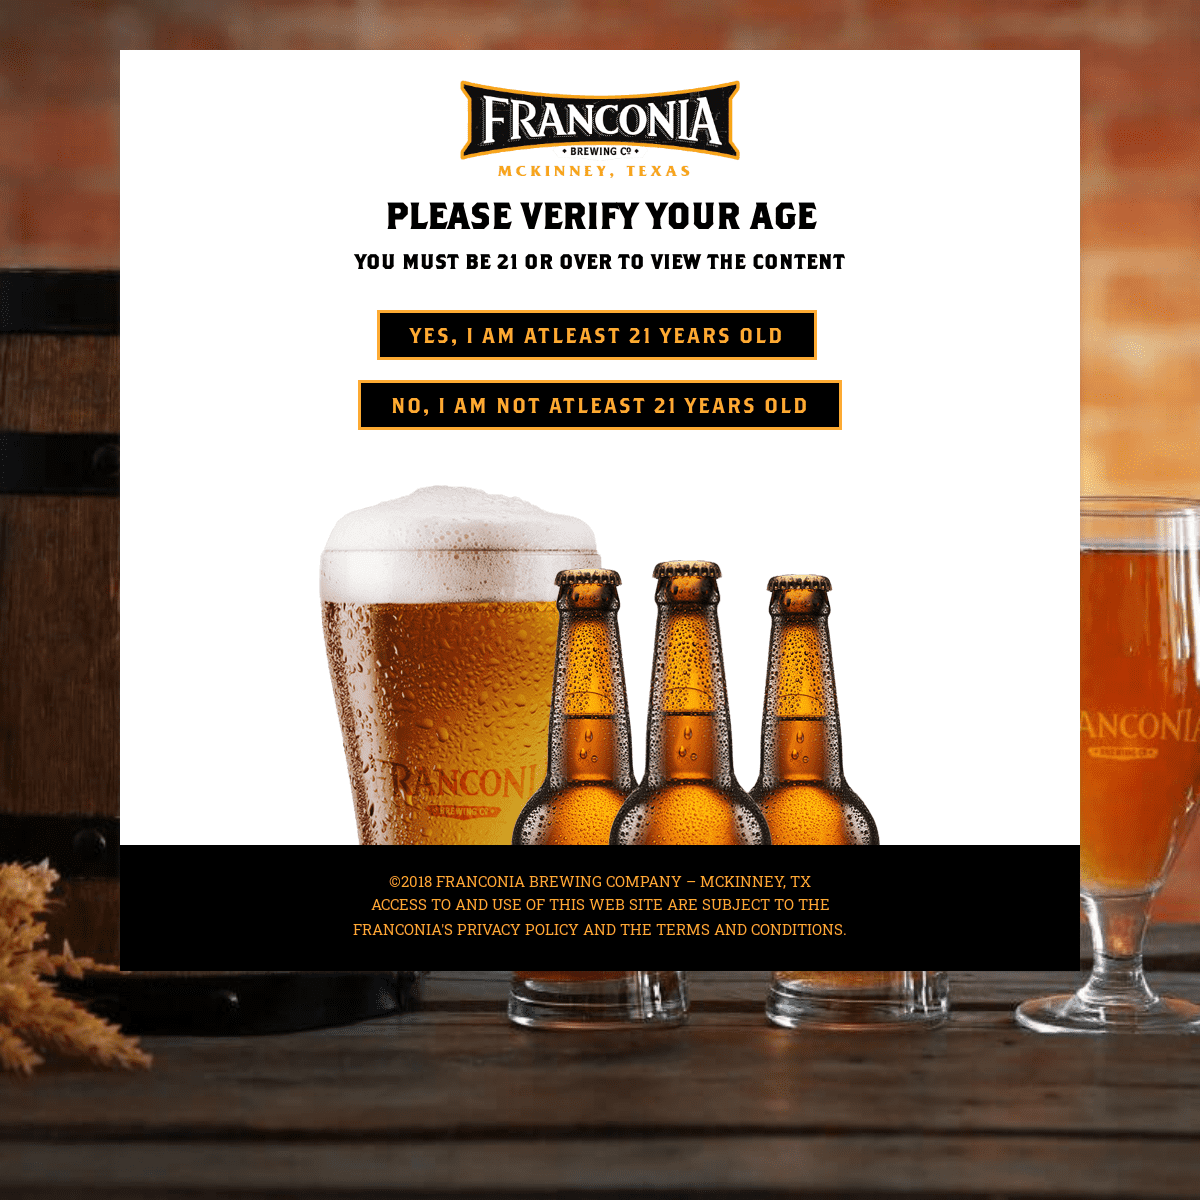 A complete backup of https://franconiabrewing.com